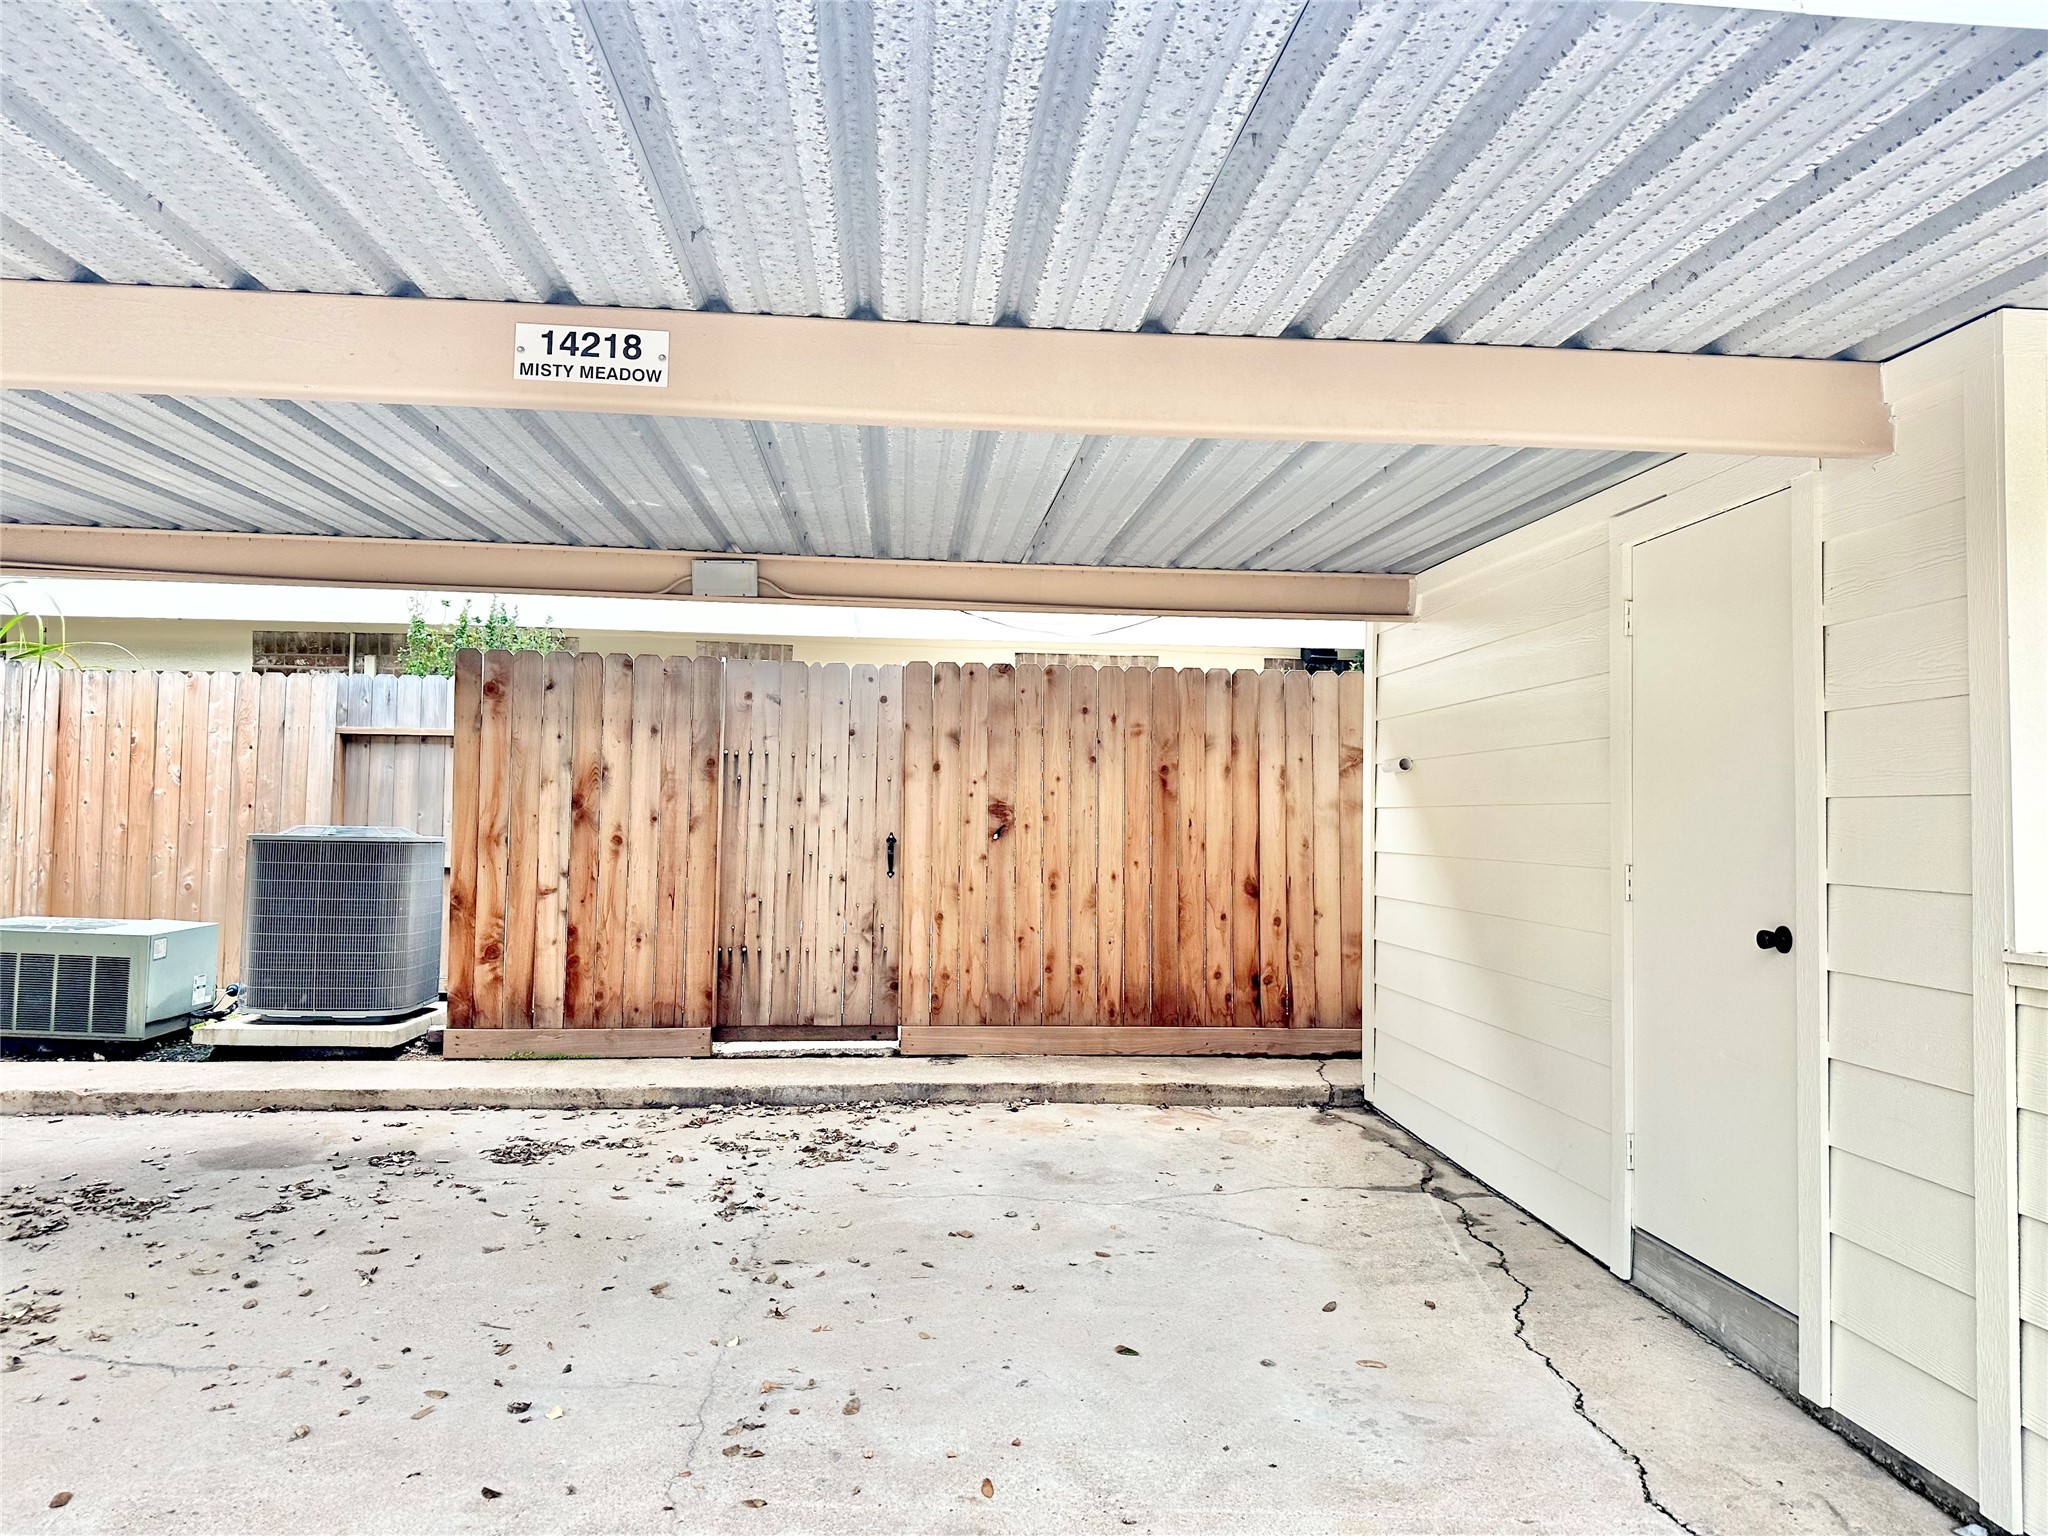 Your own 2 covered parking spaces which is only few steps to your back patio. Door on the right is your own storage area.